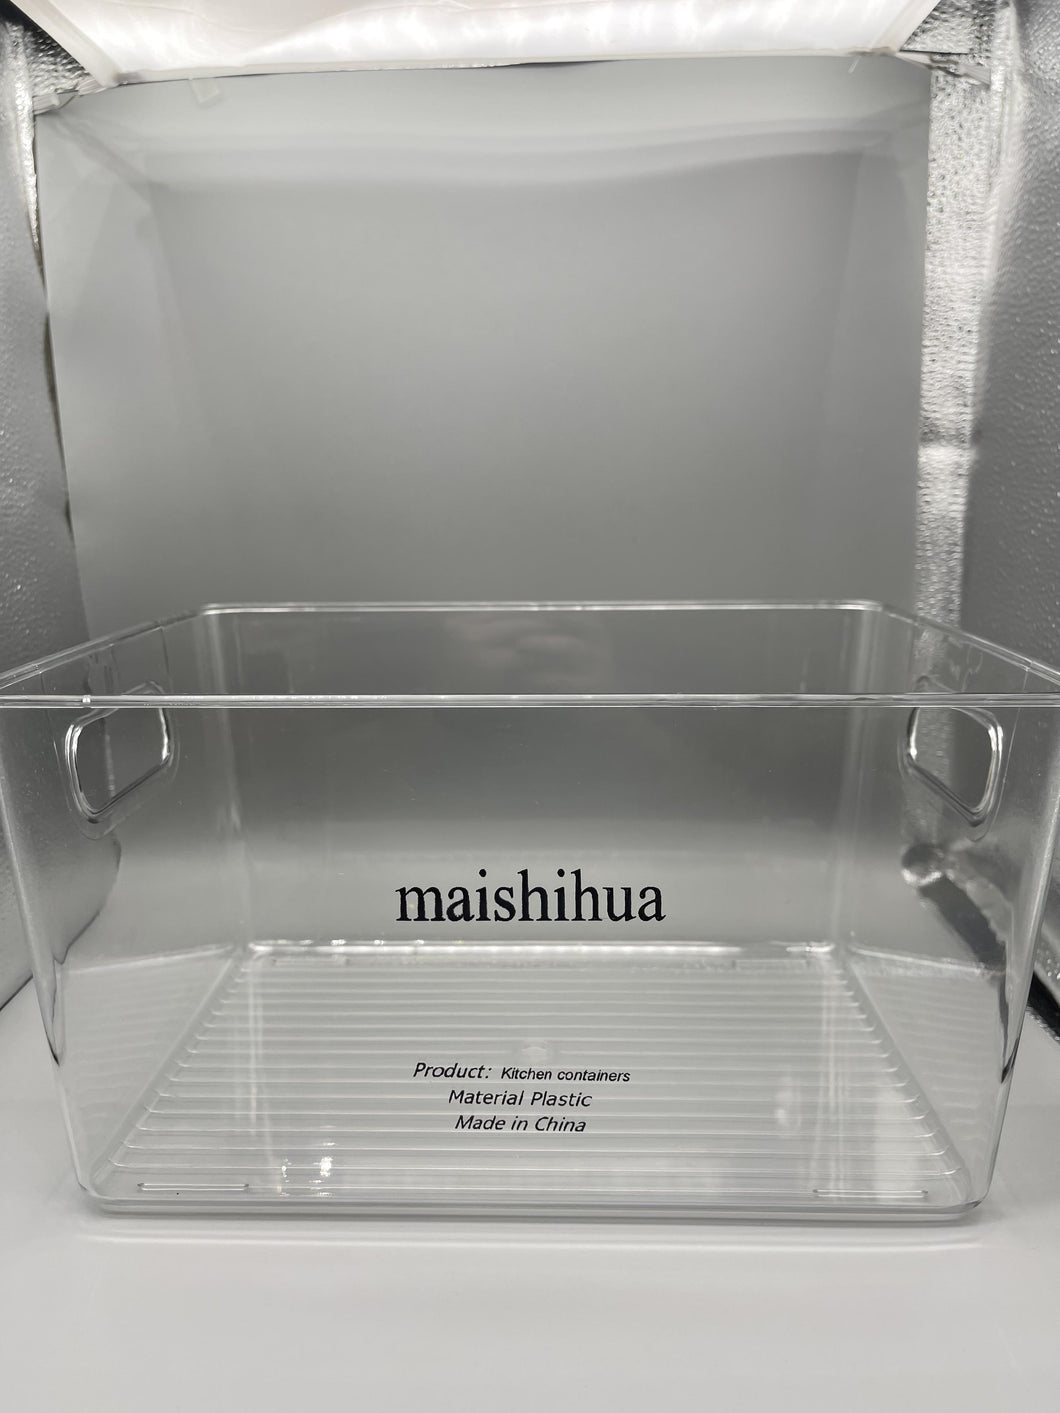 maishihua Kitchen containers ,Clear Plastic Storage Organizer Container Bins with Cutout Handles, Transparent Set of 4, BPA Free, Cabinet Storage Bins for Kitchen Food Pantry Refrigerator Bathroom, 11” x 8” x 6”